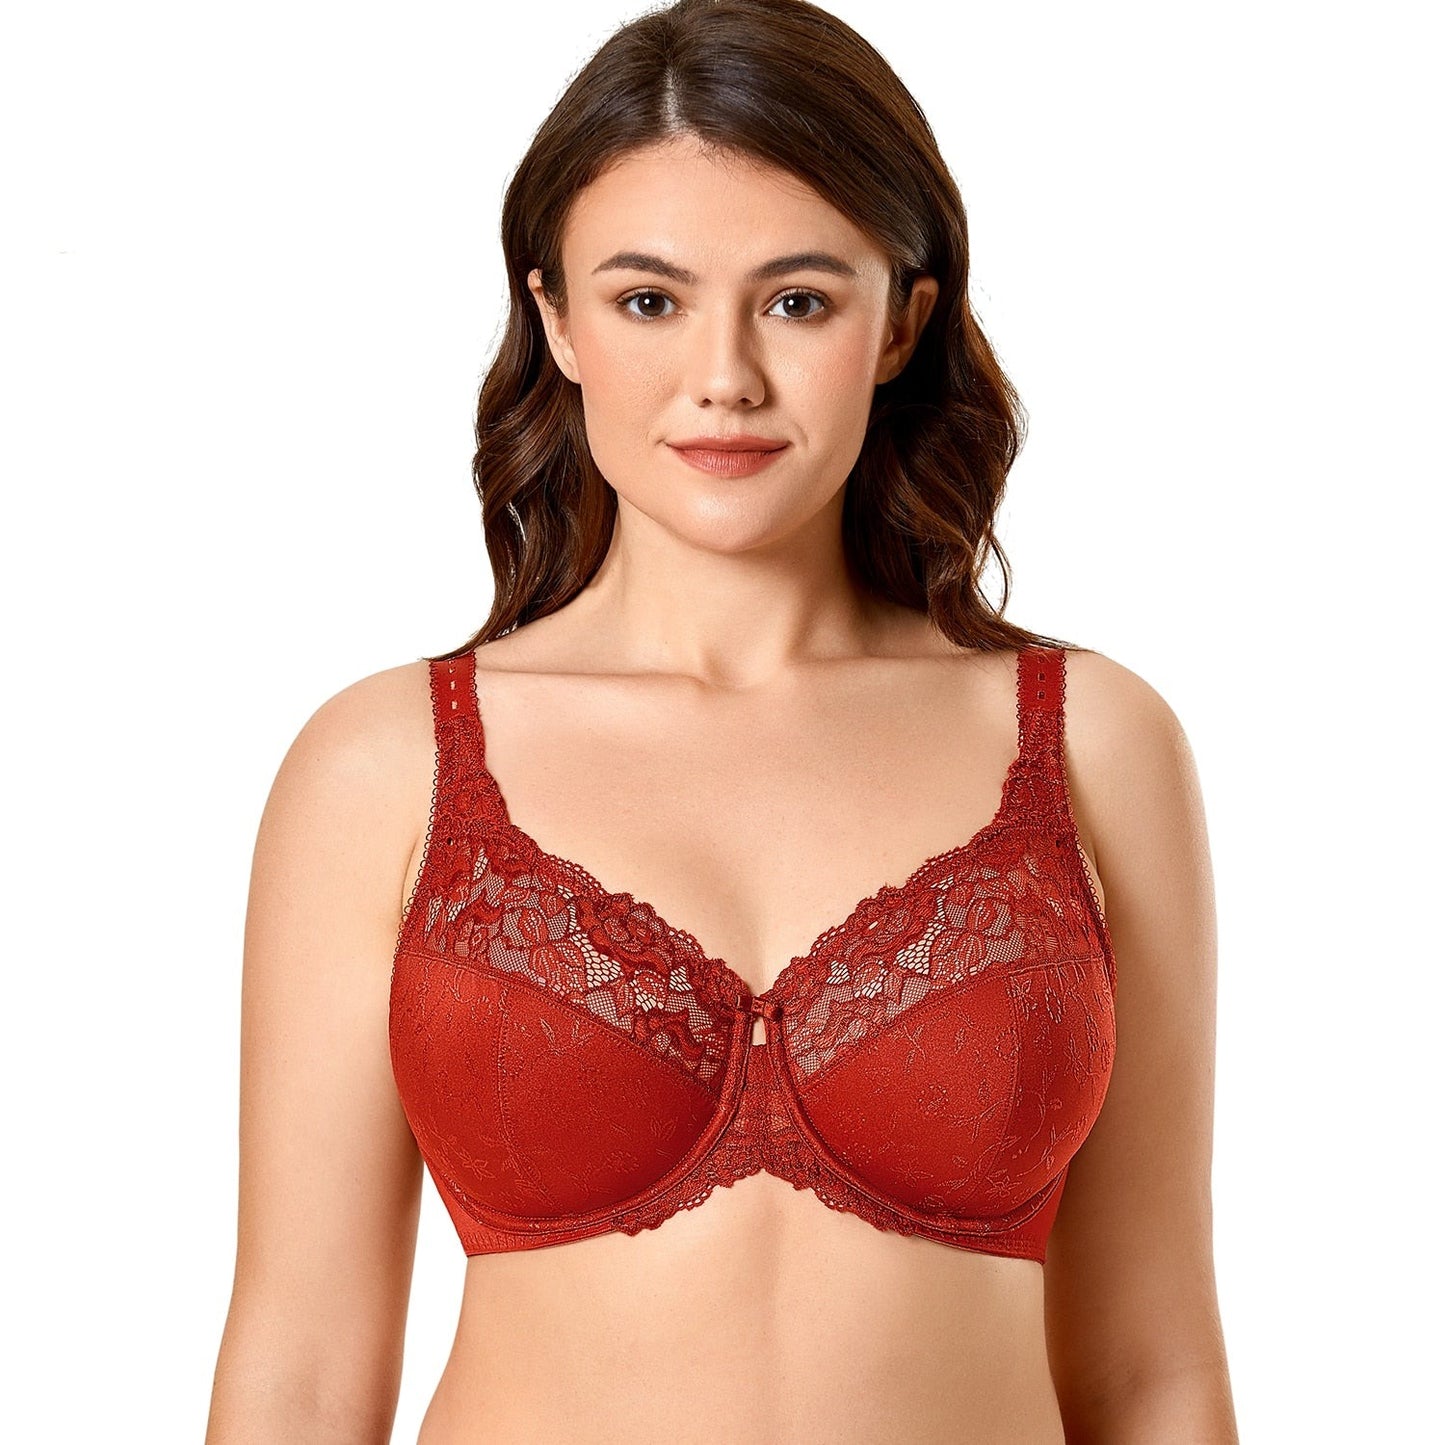 Large Cup Size Lace Underwire Bra, Gorsenia, Size: 36B, Color: Red and  Black